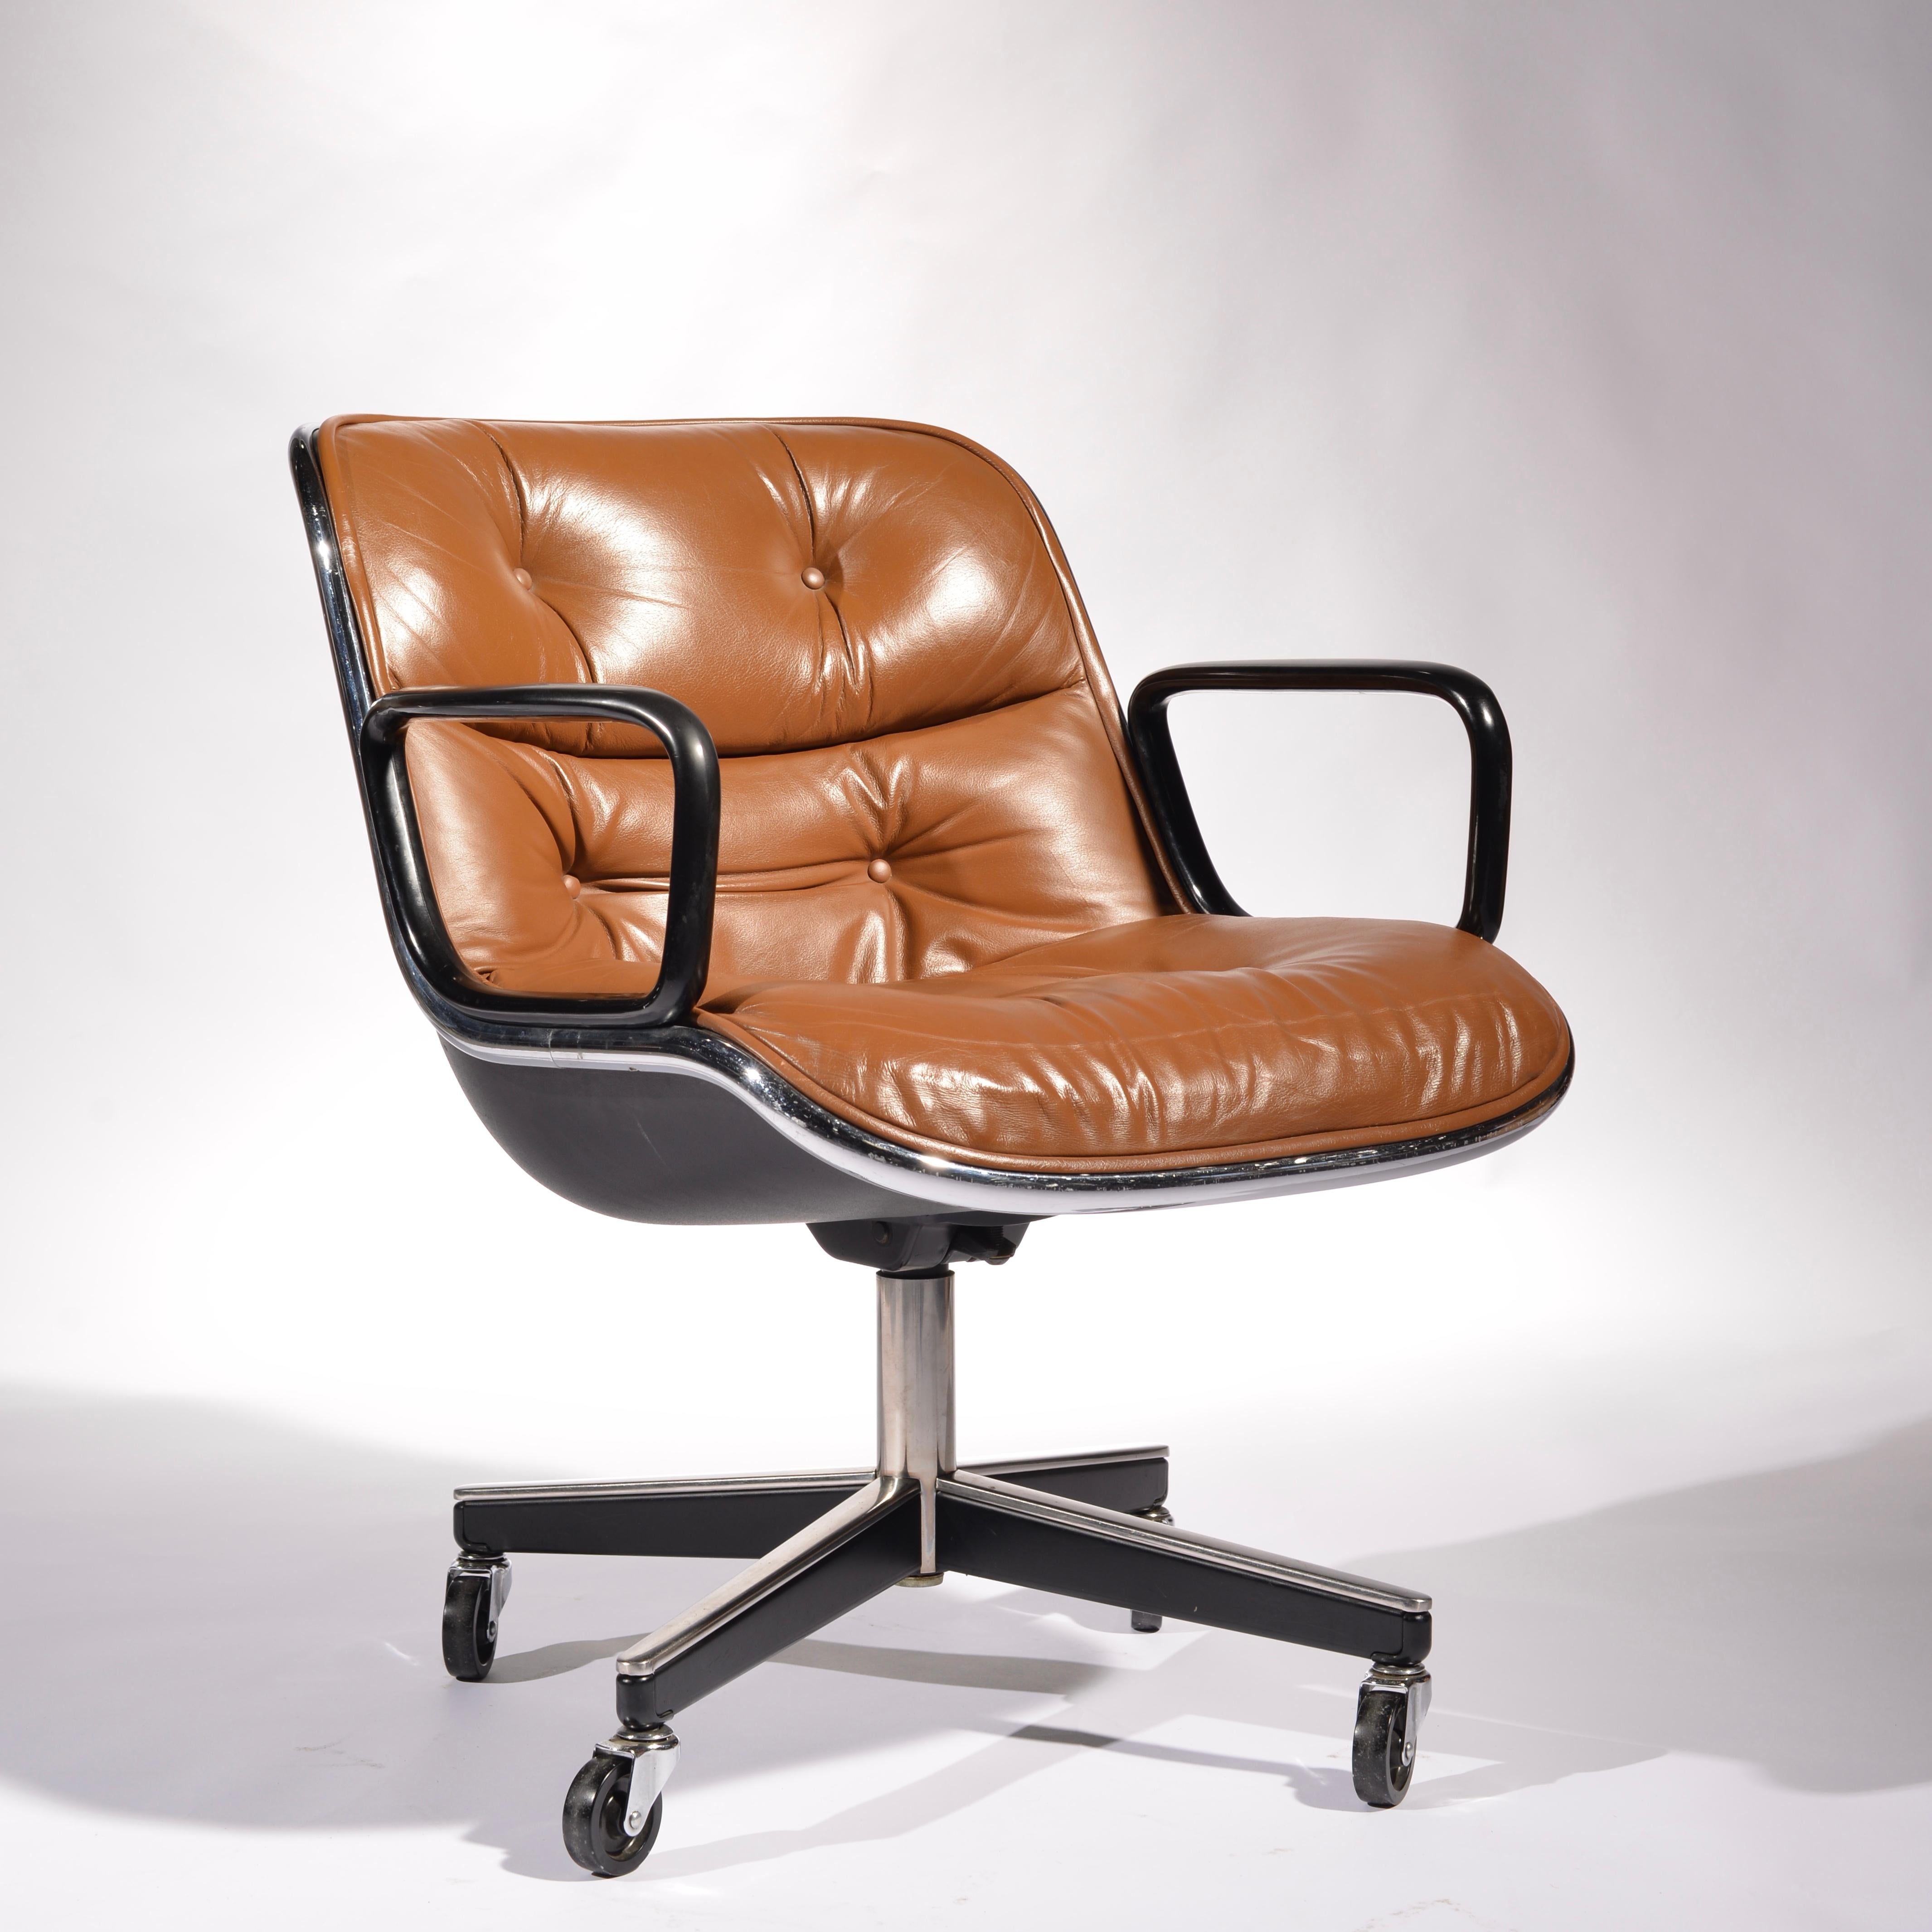 American 16 Charles Pollock Executive Desk Chairs for Knoll in Cognac Leather